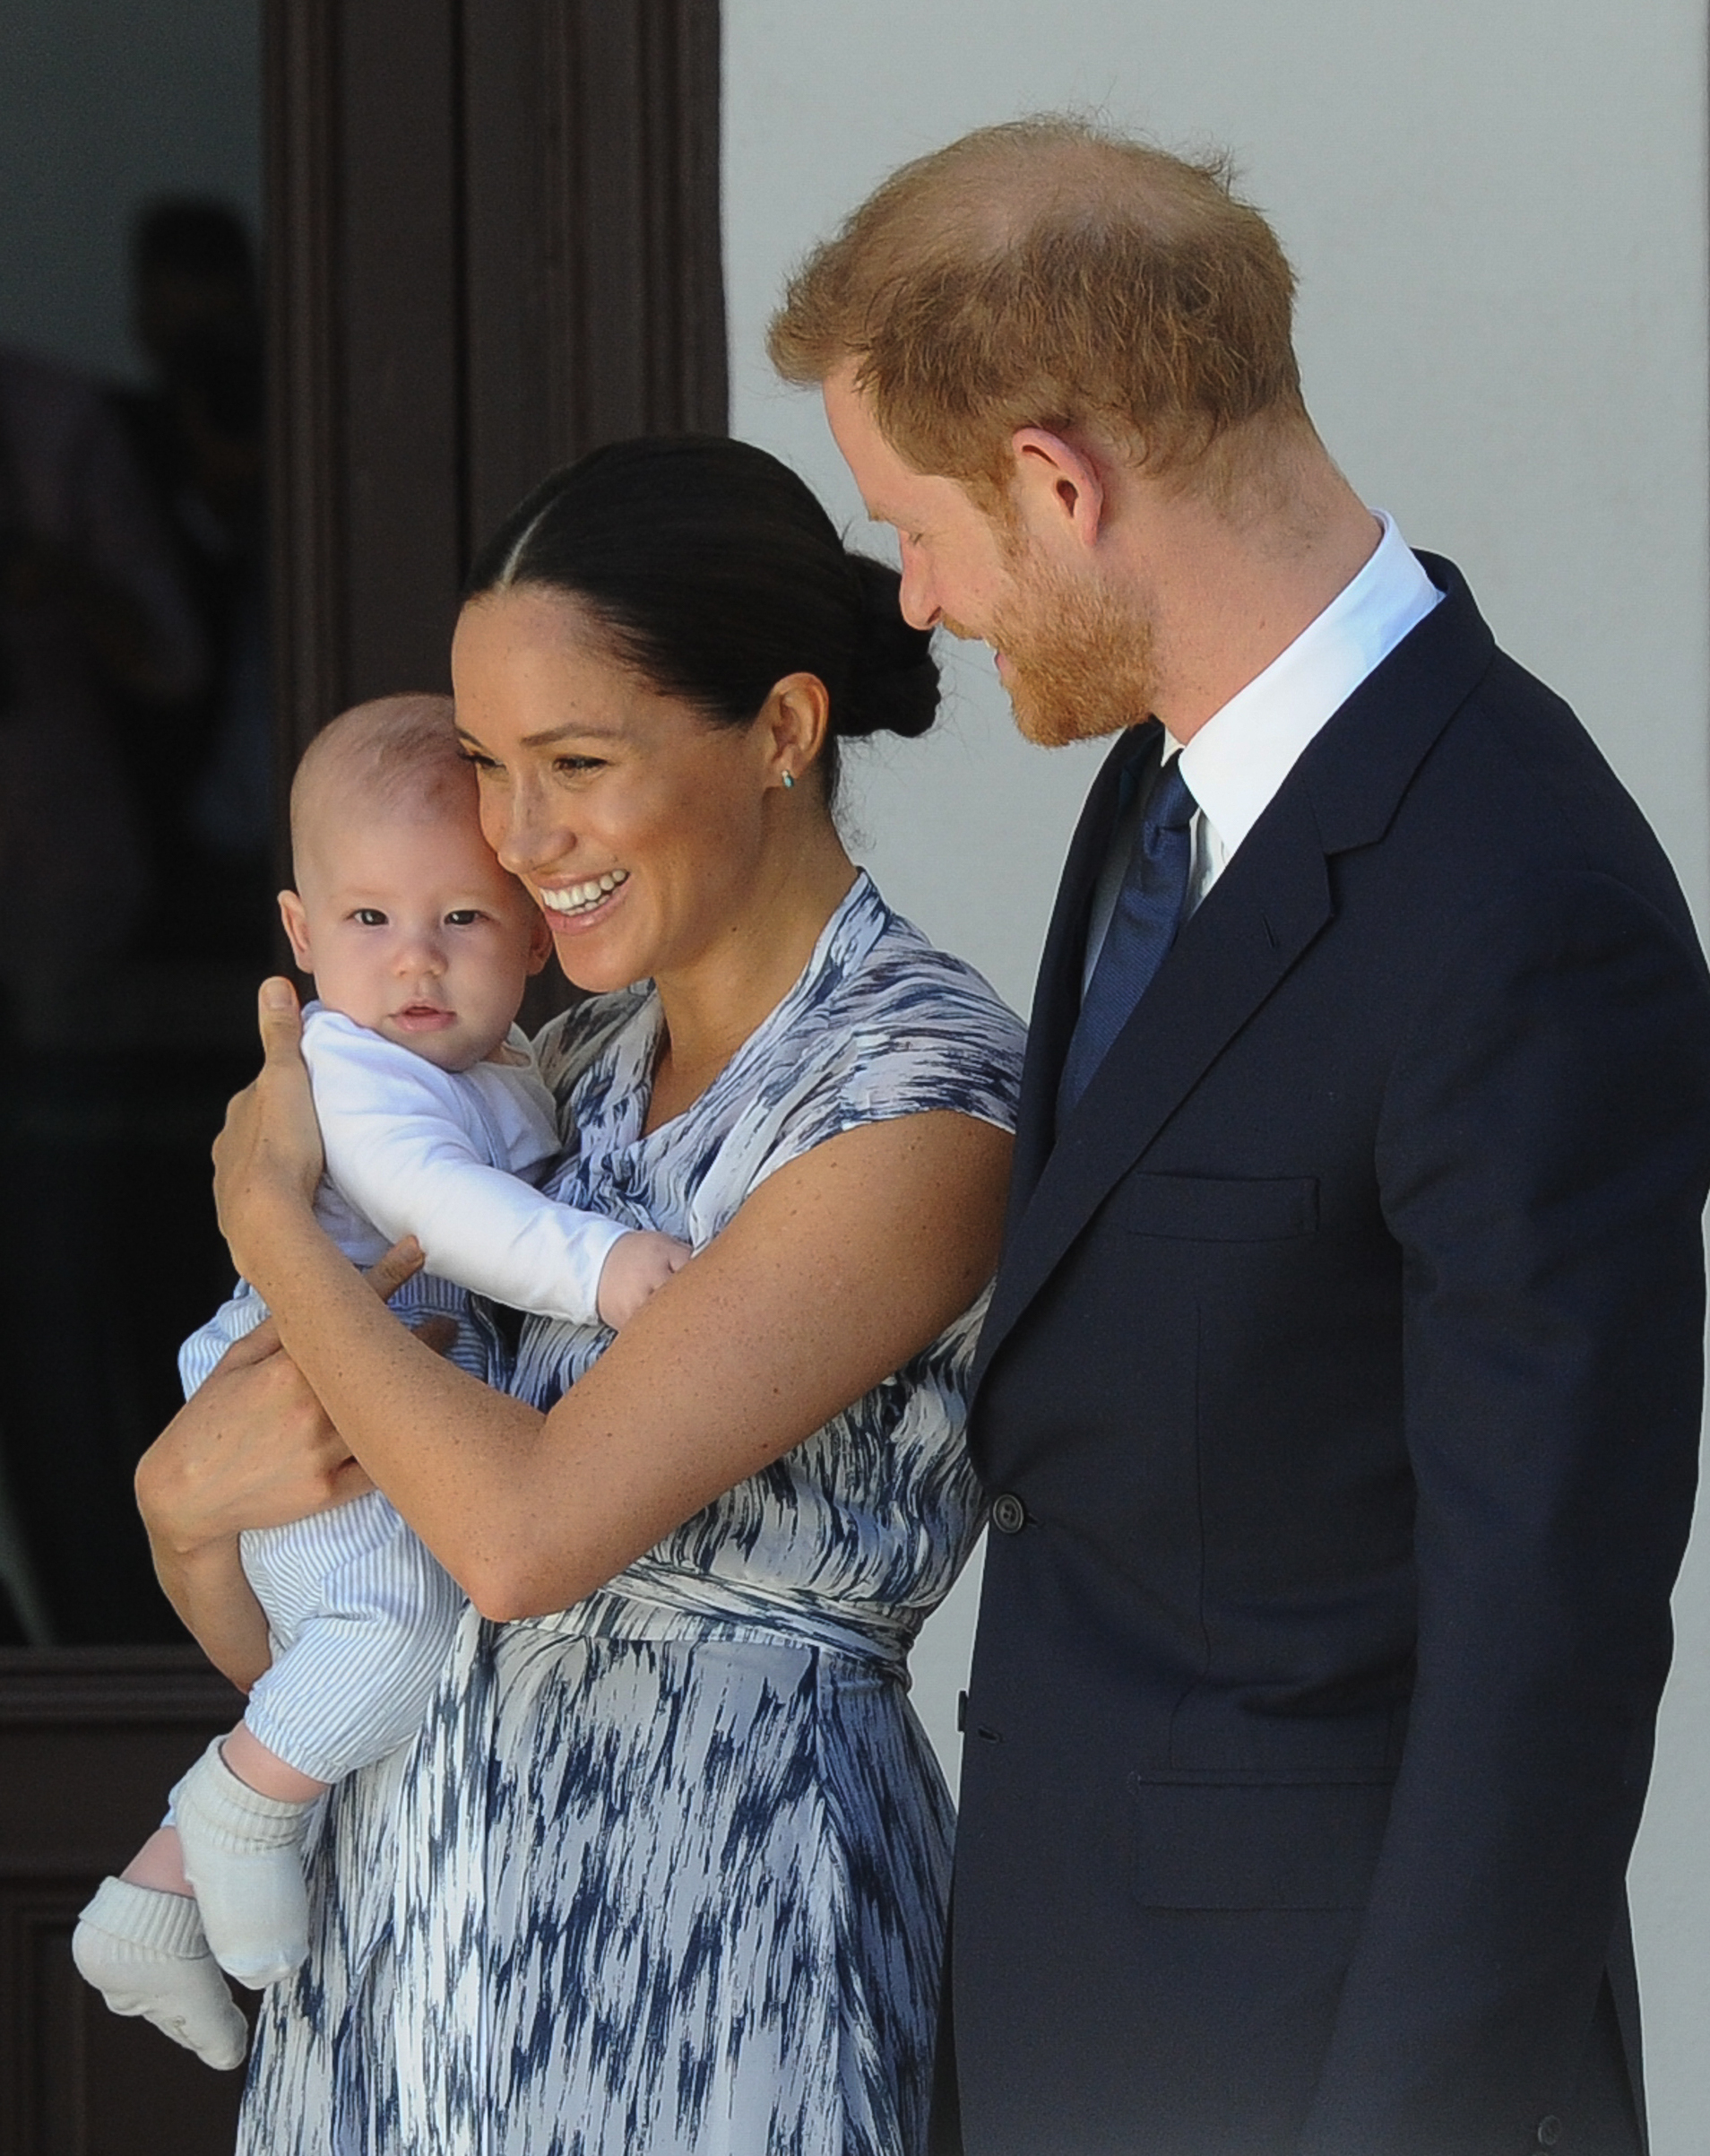 Prince Harry and his wife Meghan Markle hold their son Archie as they meet with Archbishop Desmond Tutu and his wife (unseen) at the Tutu Legacy Foundation on September 25, 2019,  in Cape Town, South Africa. | Source: Getty Images